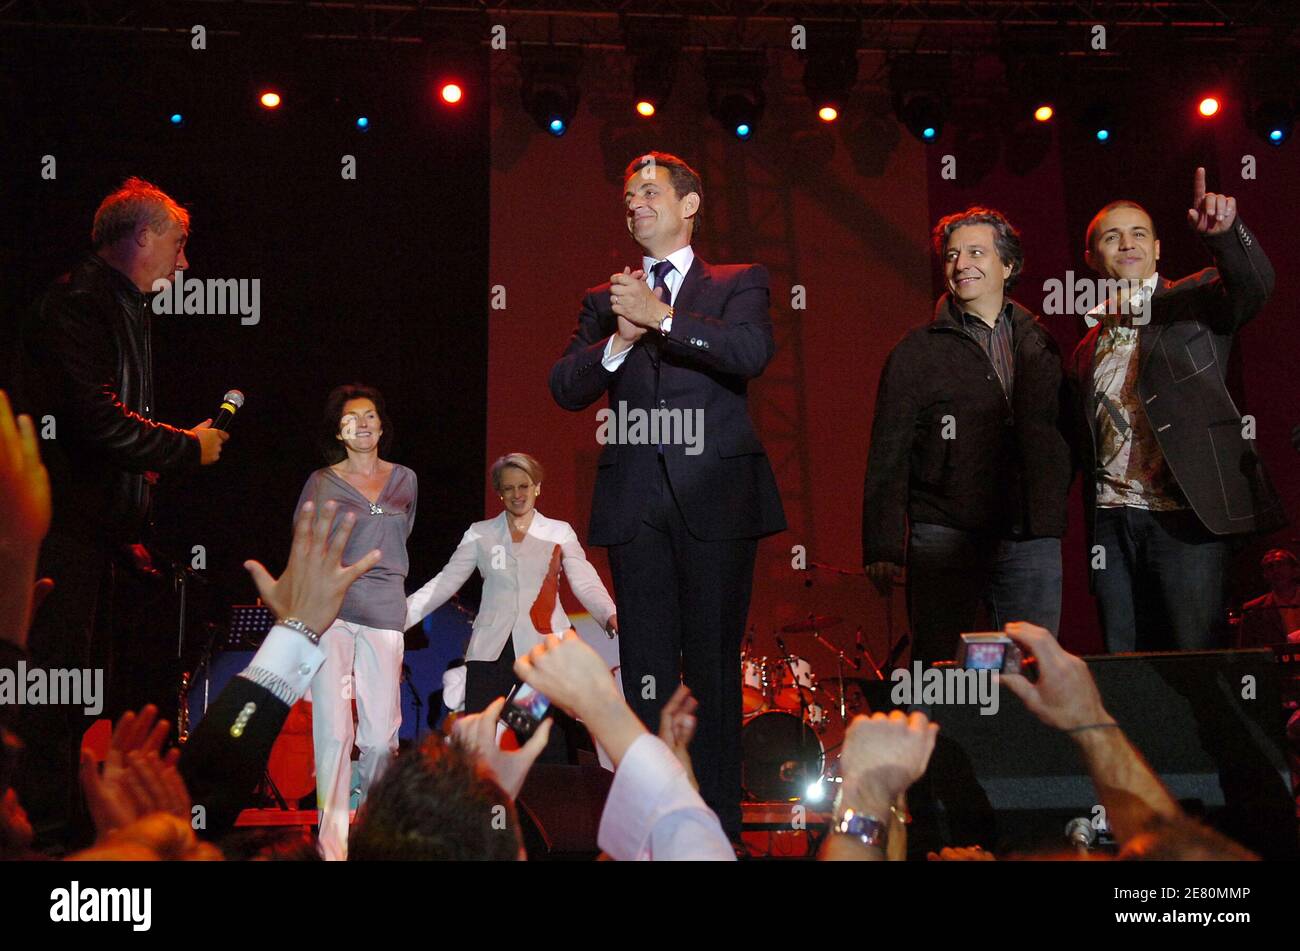 France's newly-elected president Nicolas Sarkozy addresses his supporters alongside actor Christian Clavier and singer Faudel, Place de la Concorde in Paris, France, May 6, 2007. French voters elected reform-minded Nicolas Sarkozy as their new president on Sunday, giving him a comfortable winning margin, preliminary official results and projections from four polling agencies showed. With more than half of the vote counted, Sarkozy was scoring just over 53 percent to a little more than 46 percent for Socialist Segolene Royal. Polling agencies also had the conservative Sarkozy winning 53 percent Stock Photo